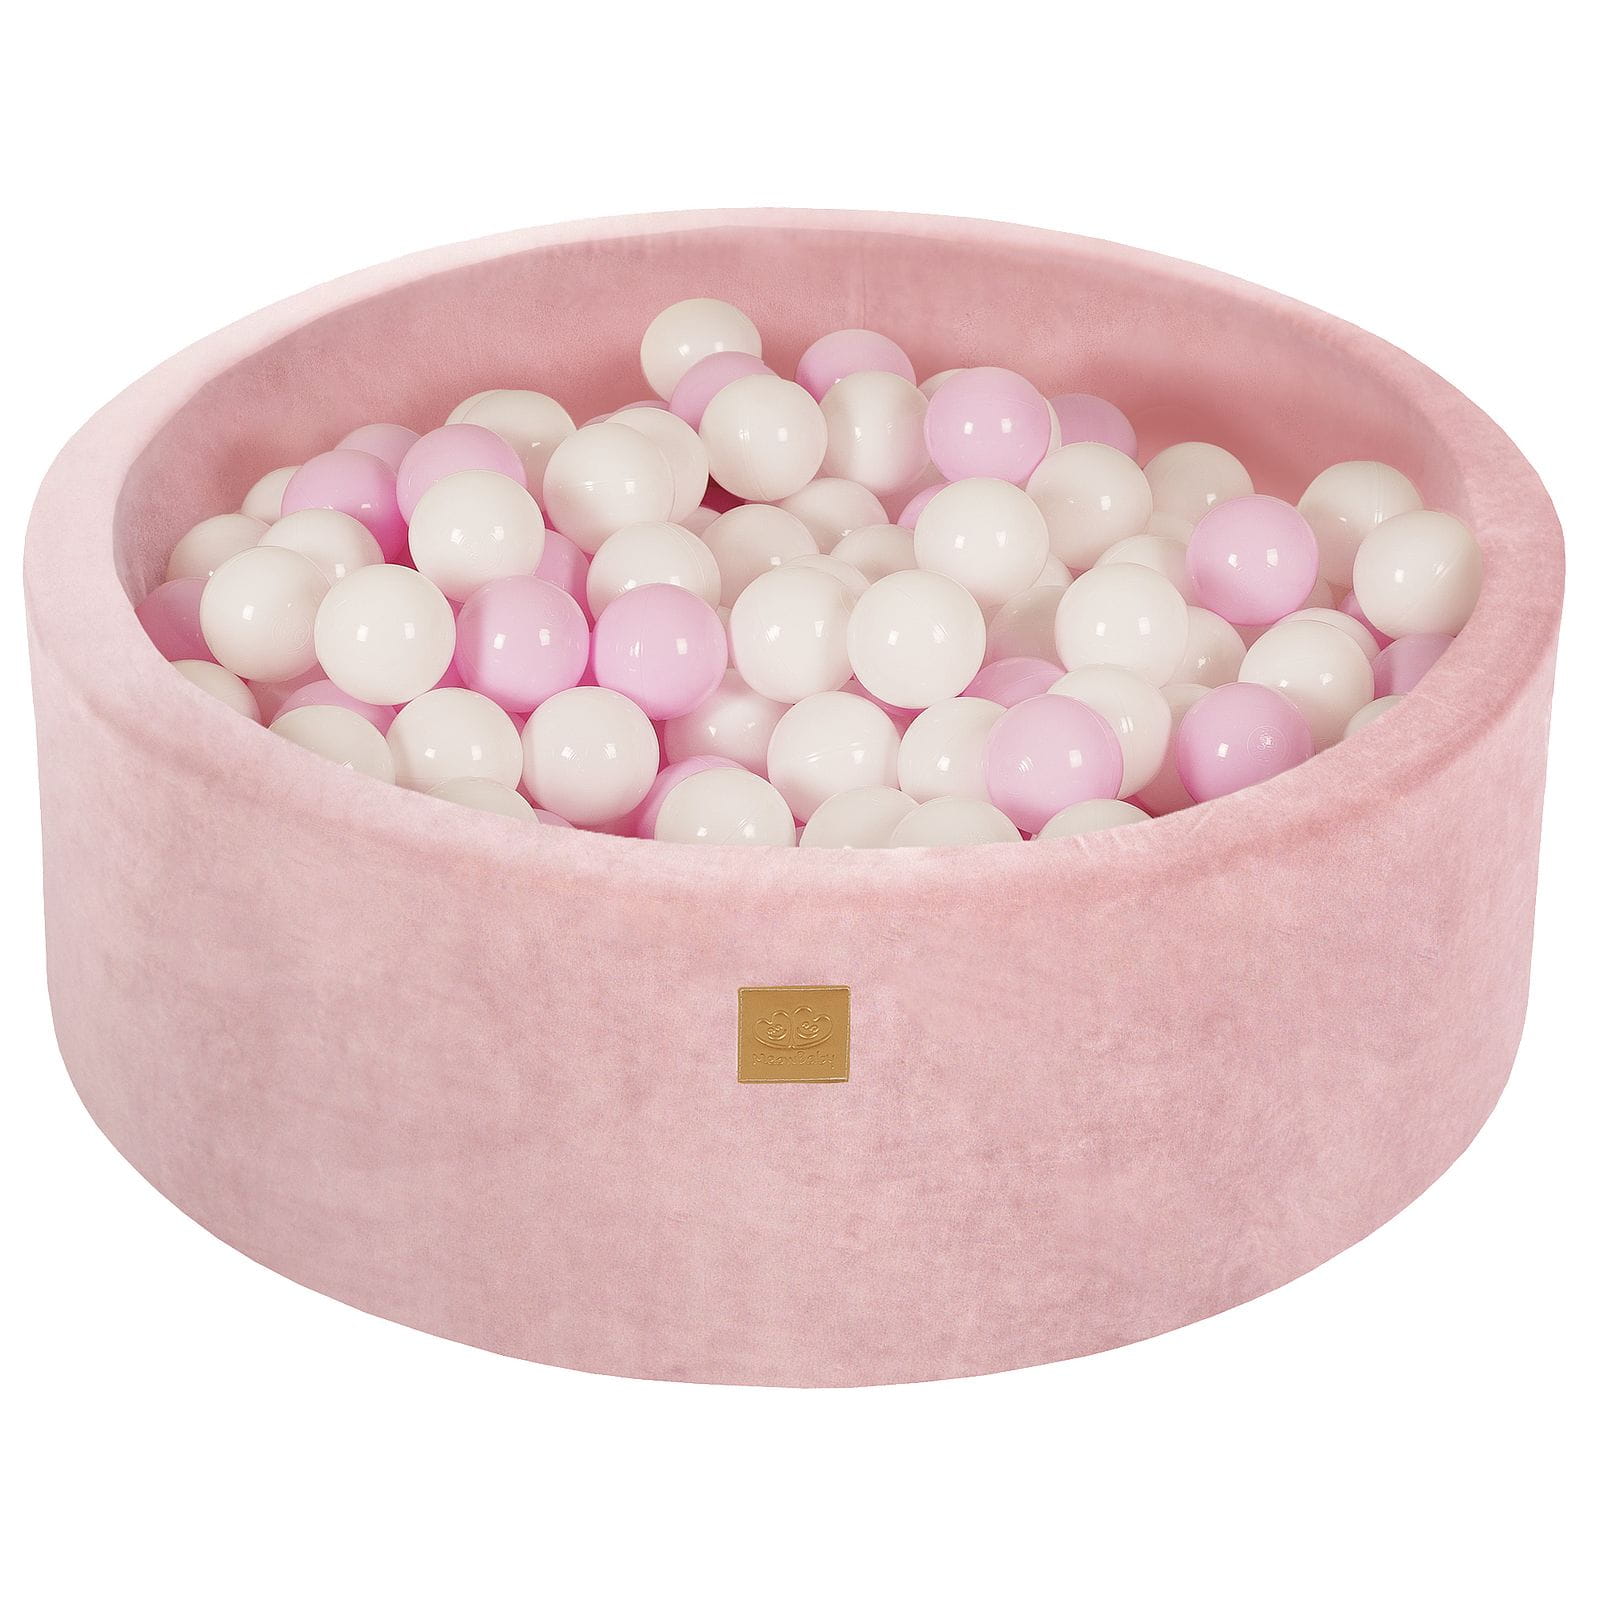 MEOW BABY Ball Pit with 200 Balls 2.75in Included for Toddlers - Baby Soft Foam Round Playpen, Velvet, Powder Pink: White/Pastel Pink